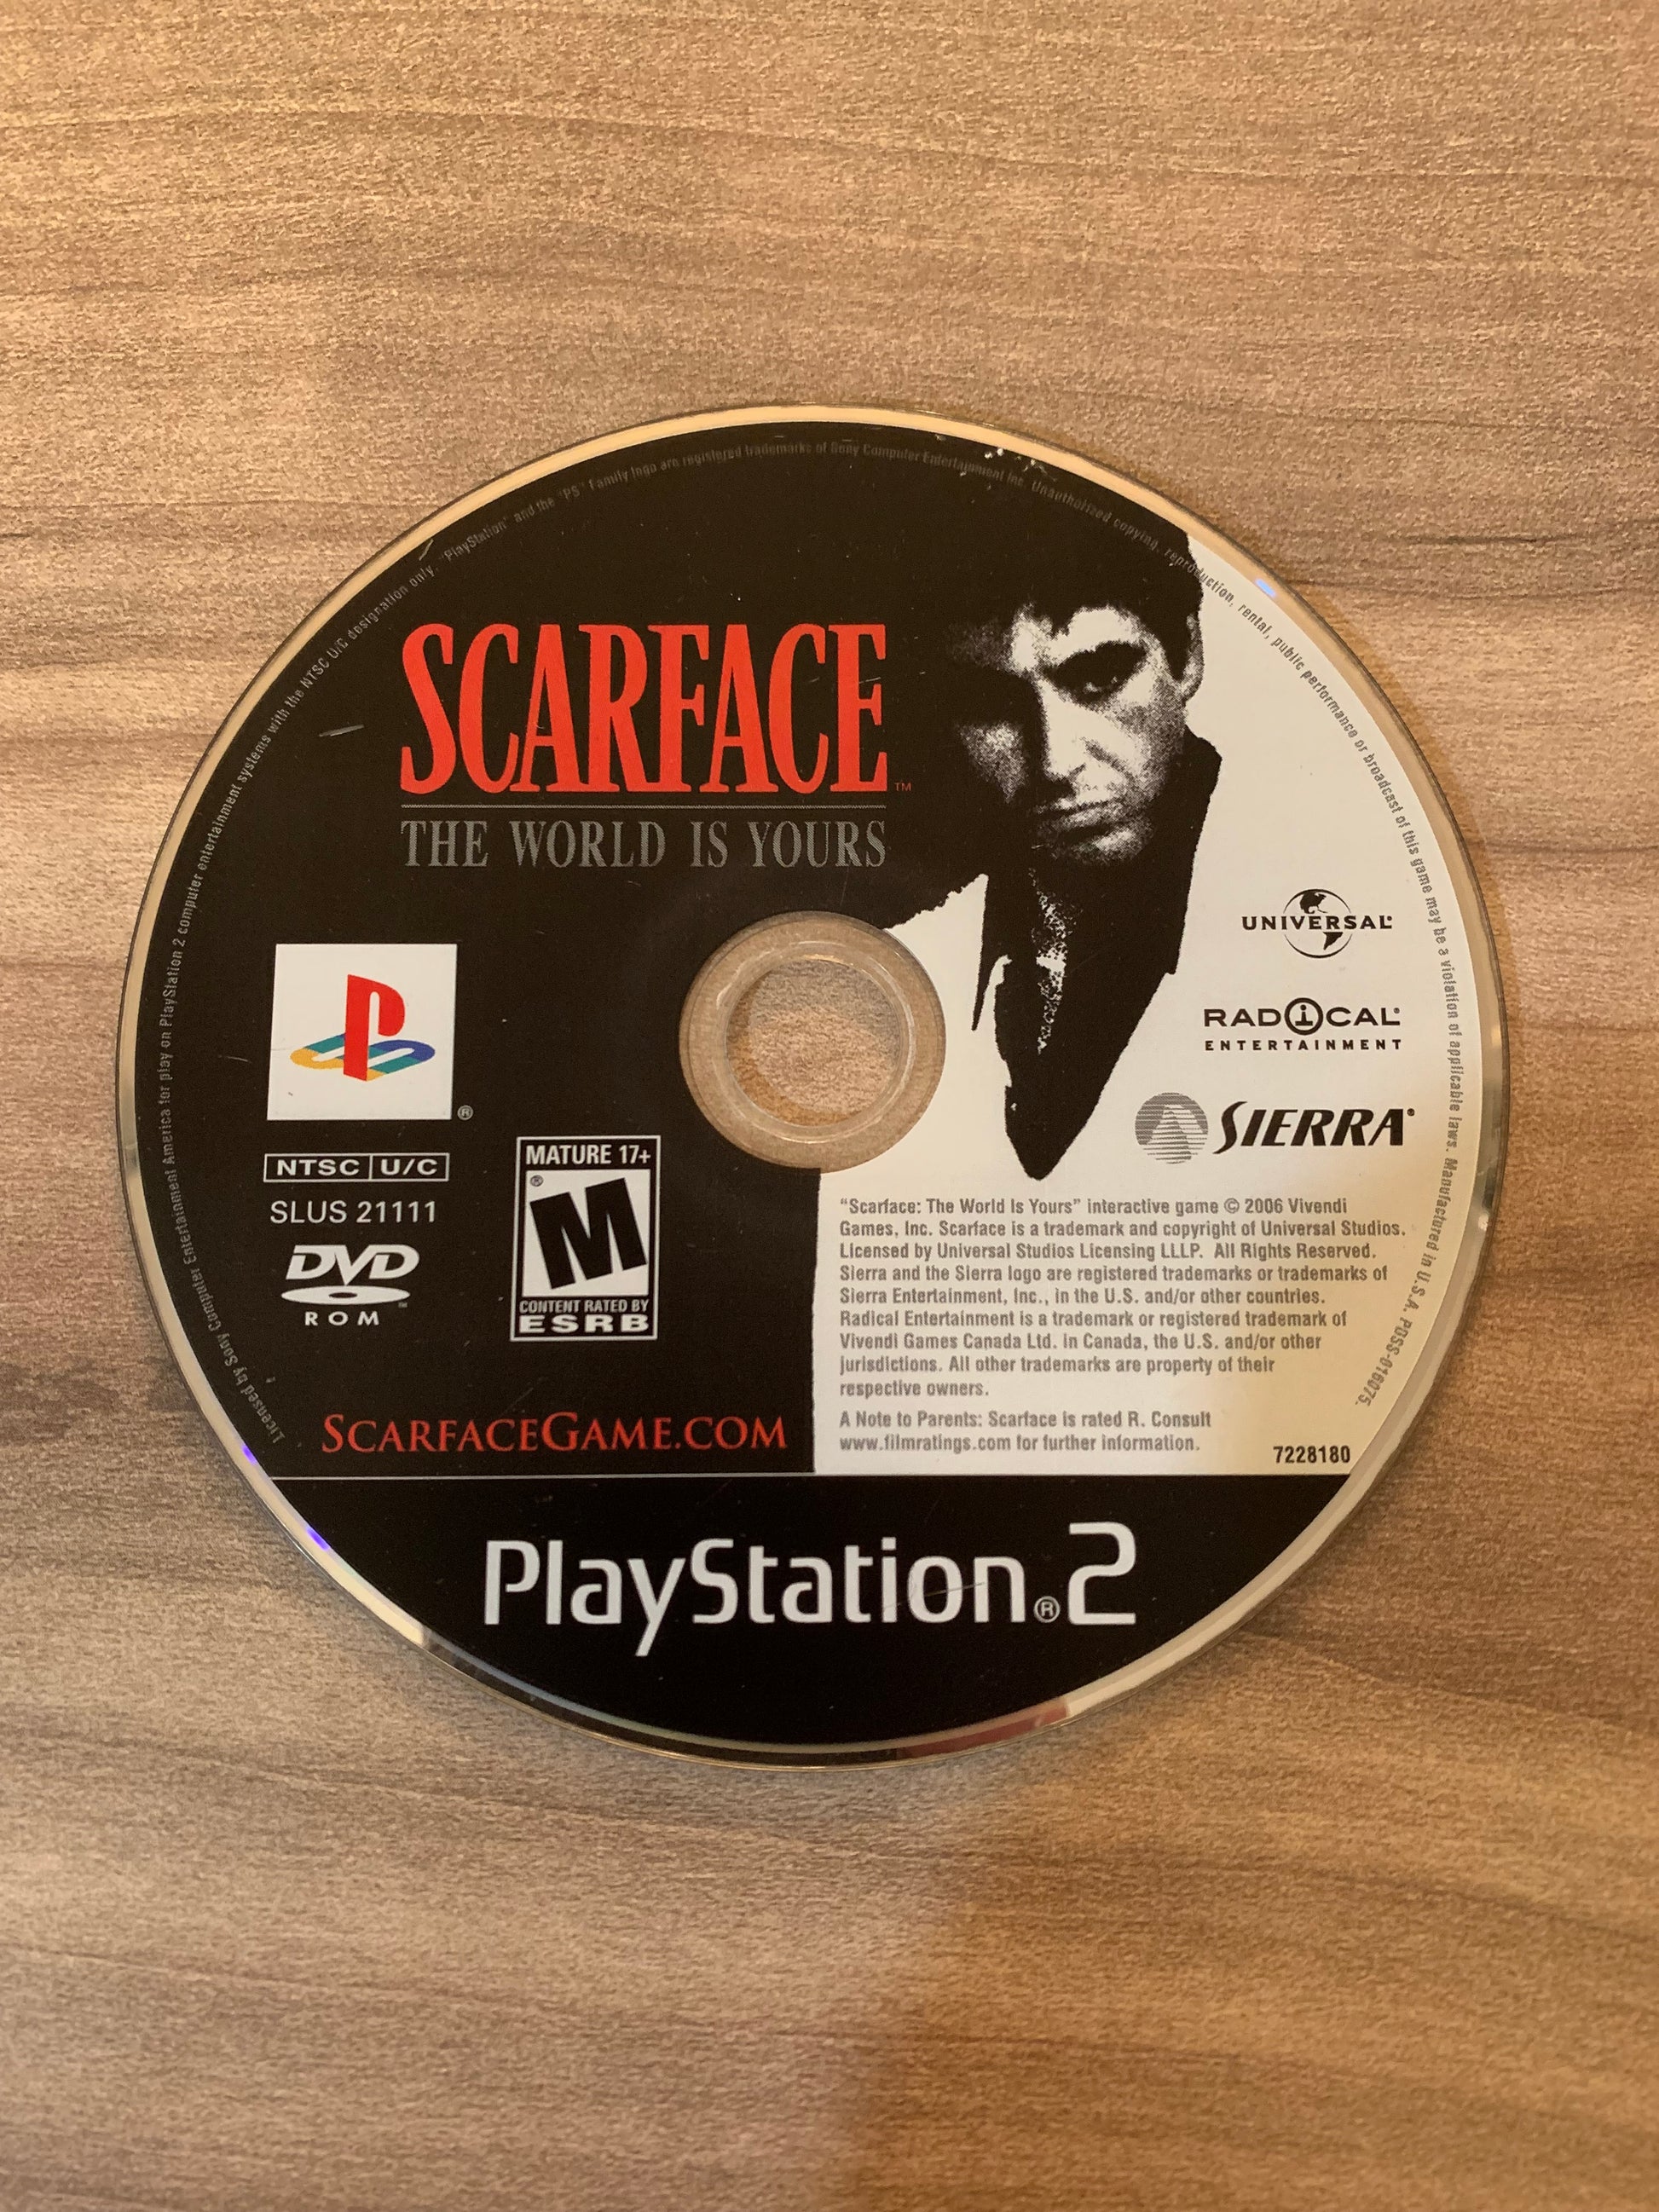 PiXEL-RETRO.COM : SONY PLAYSTATION 2 (PS2) GAME NTSC SCARFACE THE WORLD IS YOURS